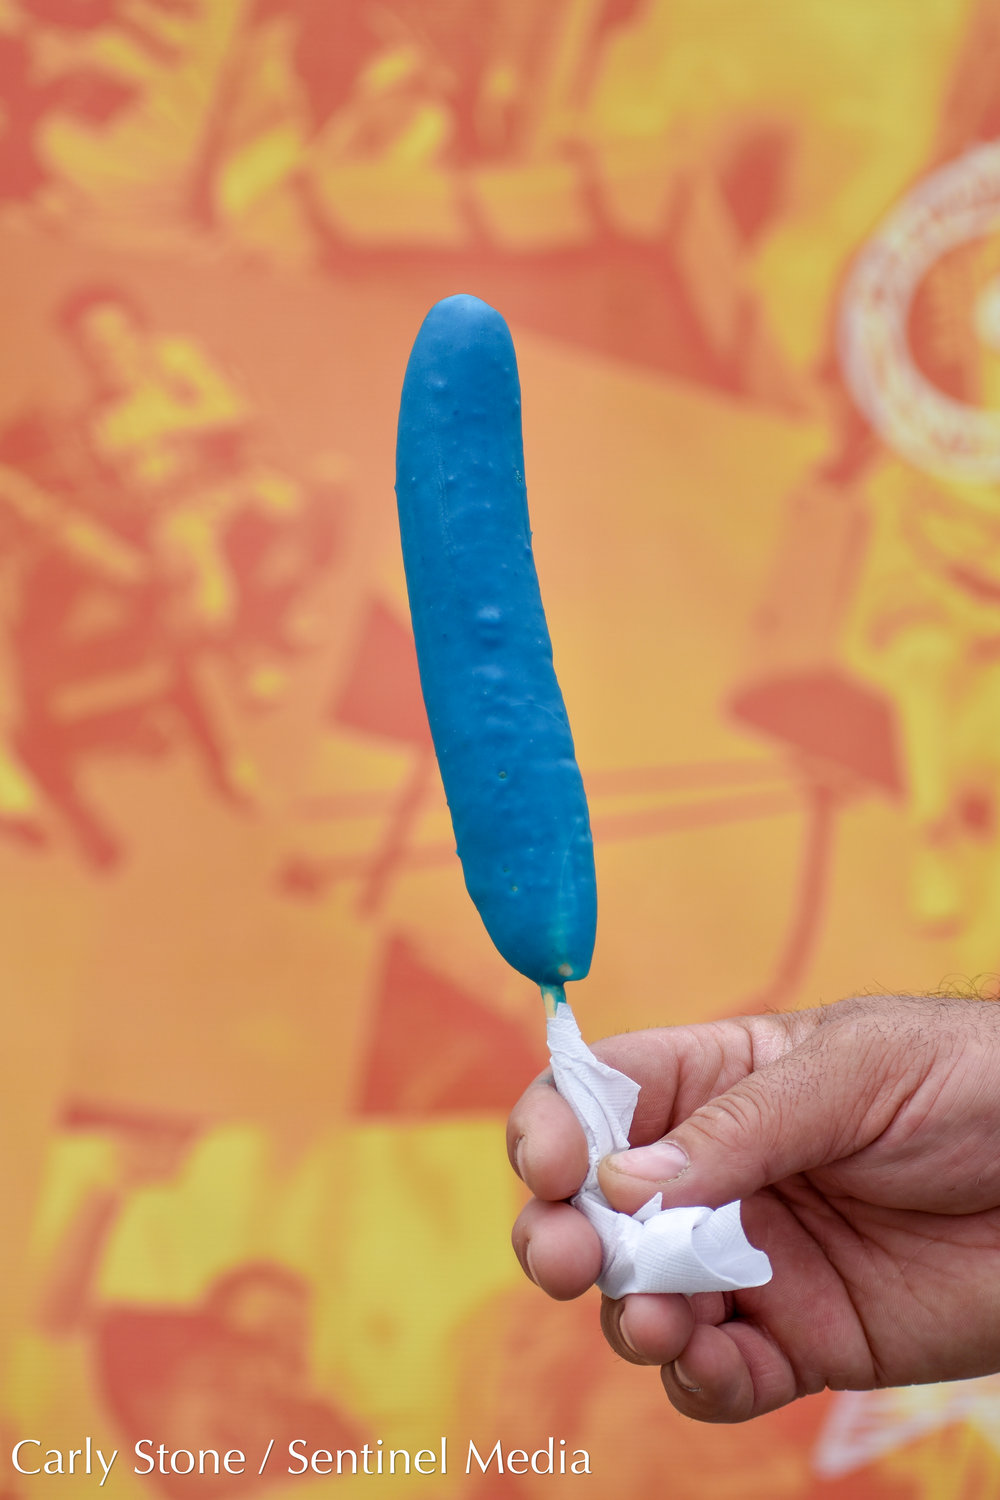 $8 frozen banana coated in blue-raspberry flavoring at the NYS Fair